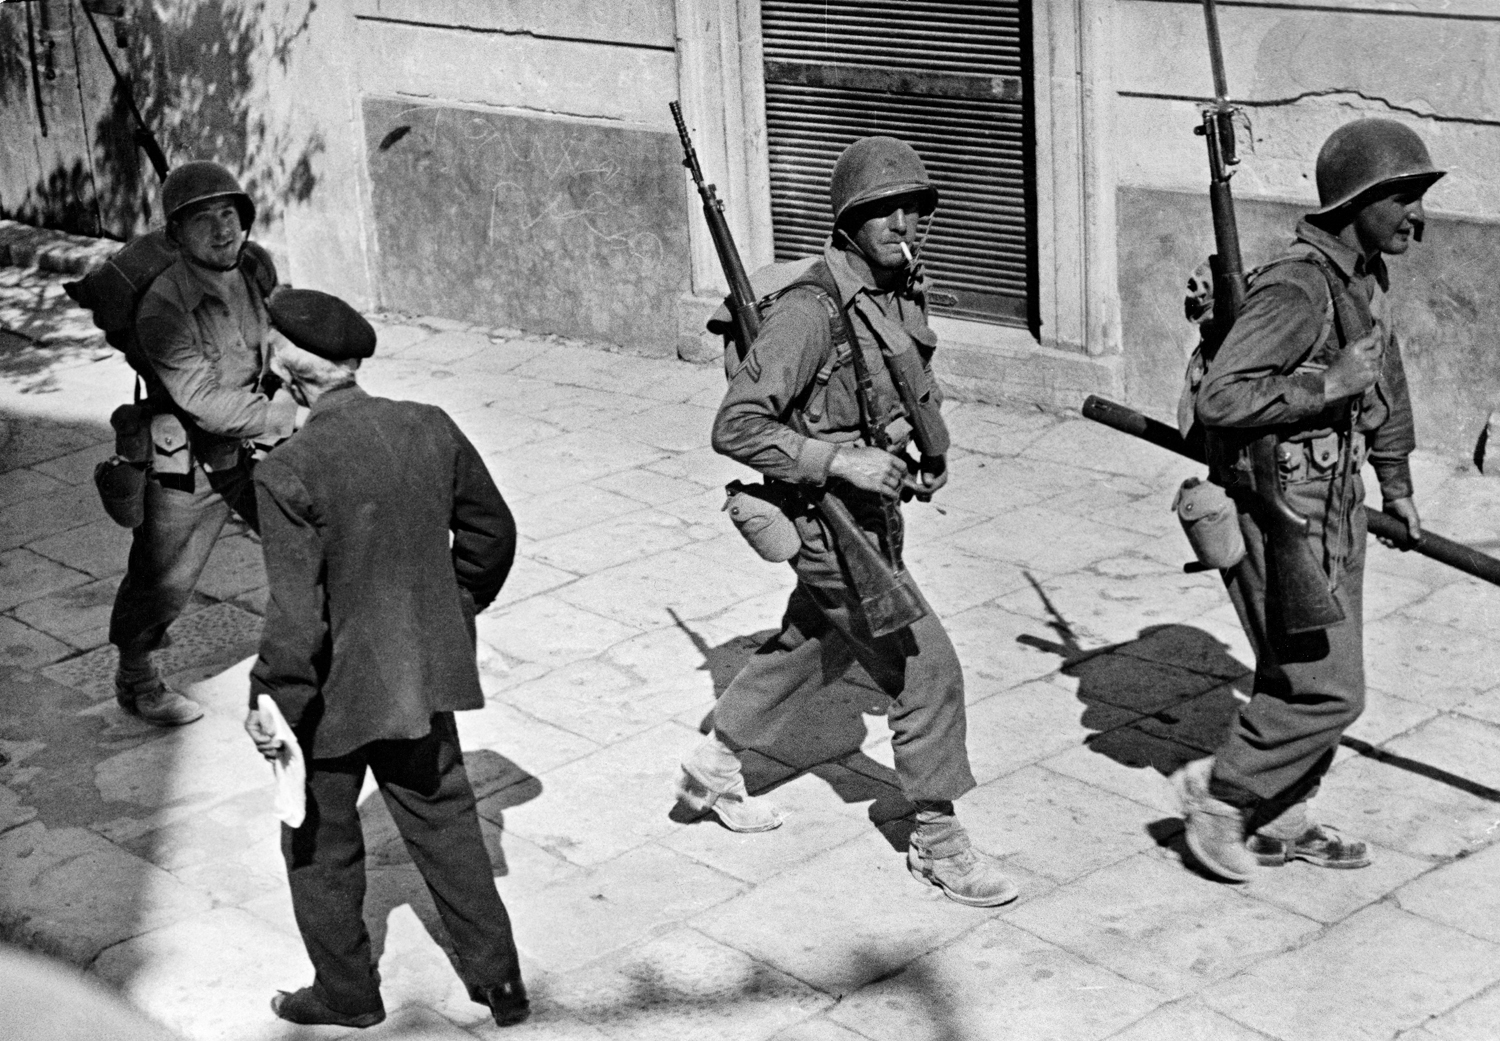 Troops advancing through the streets of Comiso, Sicily, 1943.